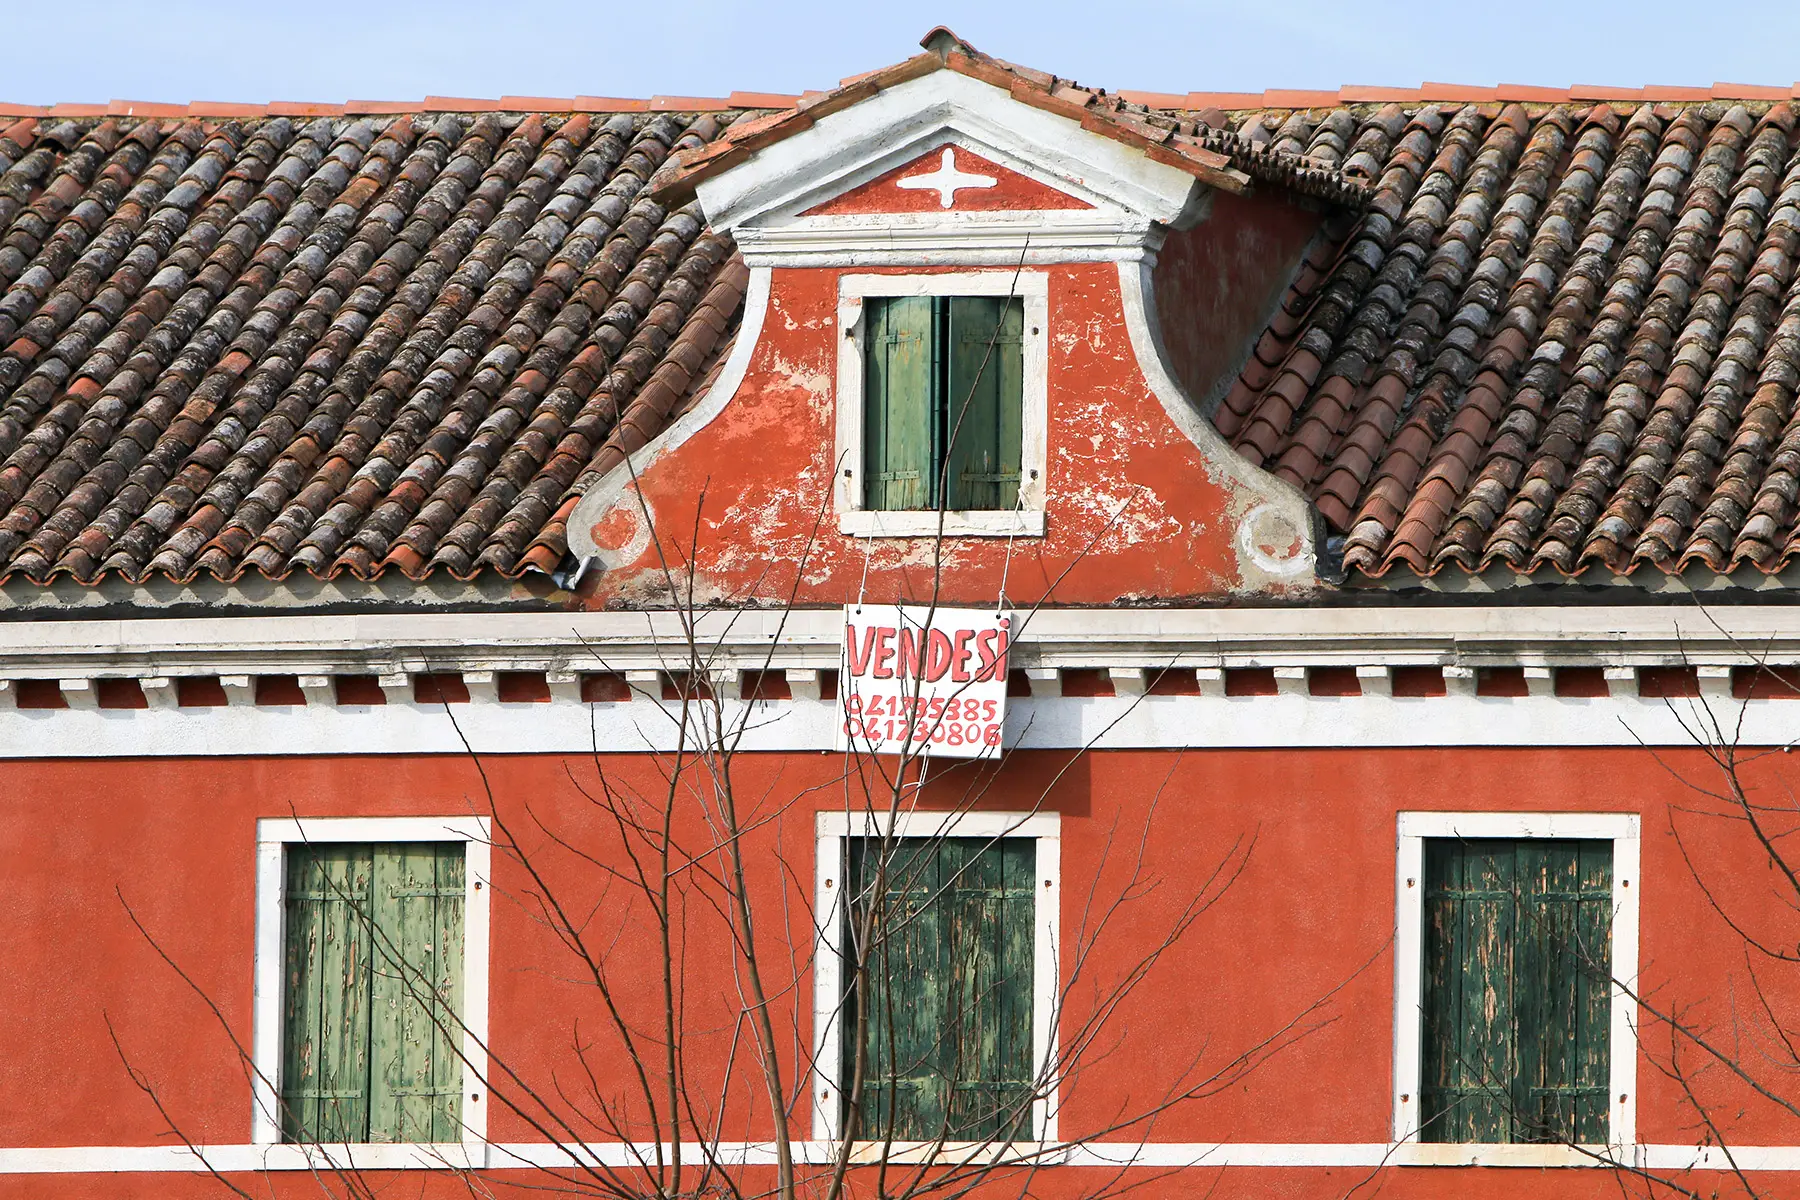 Close-up of a bright red house with a tiled roof, a for sale sign in Italian hanging from the highest window